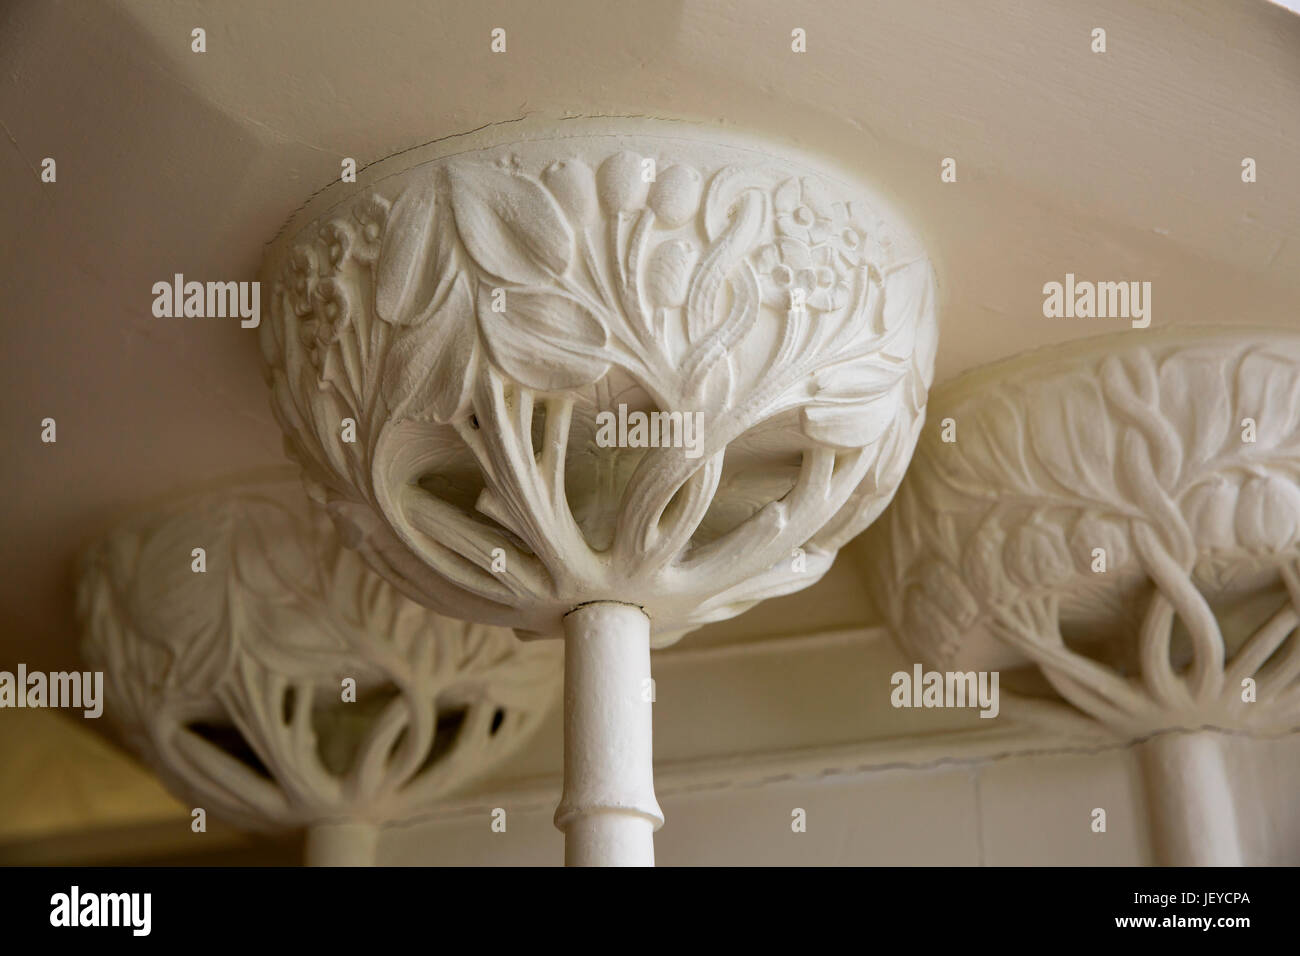 UK, Cumbria, Bowness on Windermere, Blackwell, Arts and Crafts House White Drawing Room, Baillie Scott fireplace pillar cap decoration Stock Photo